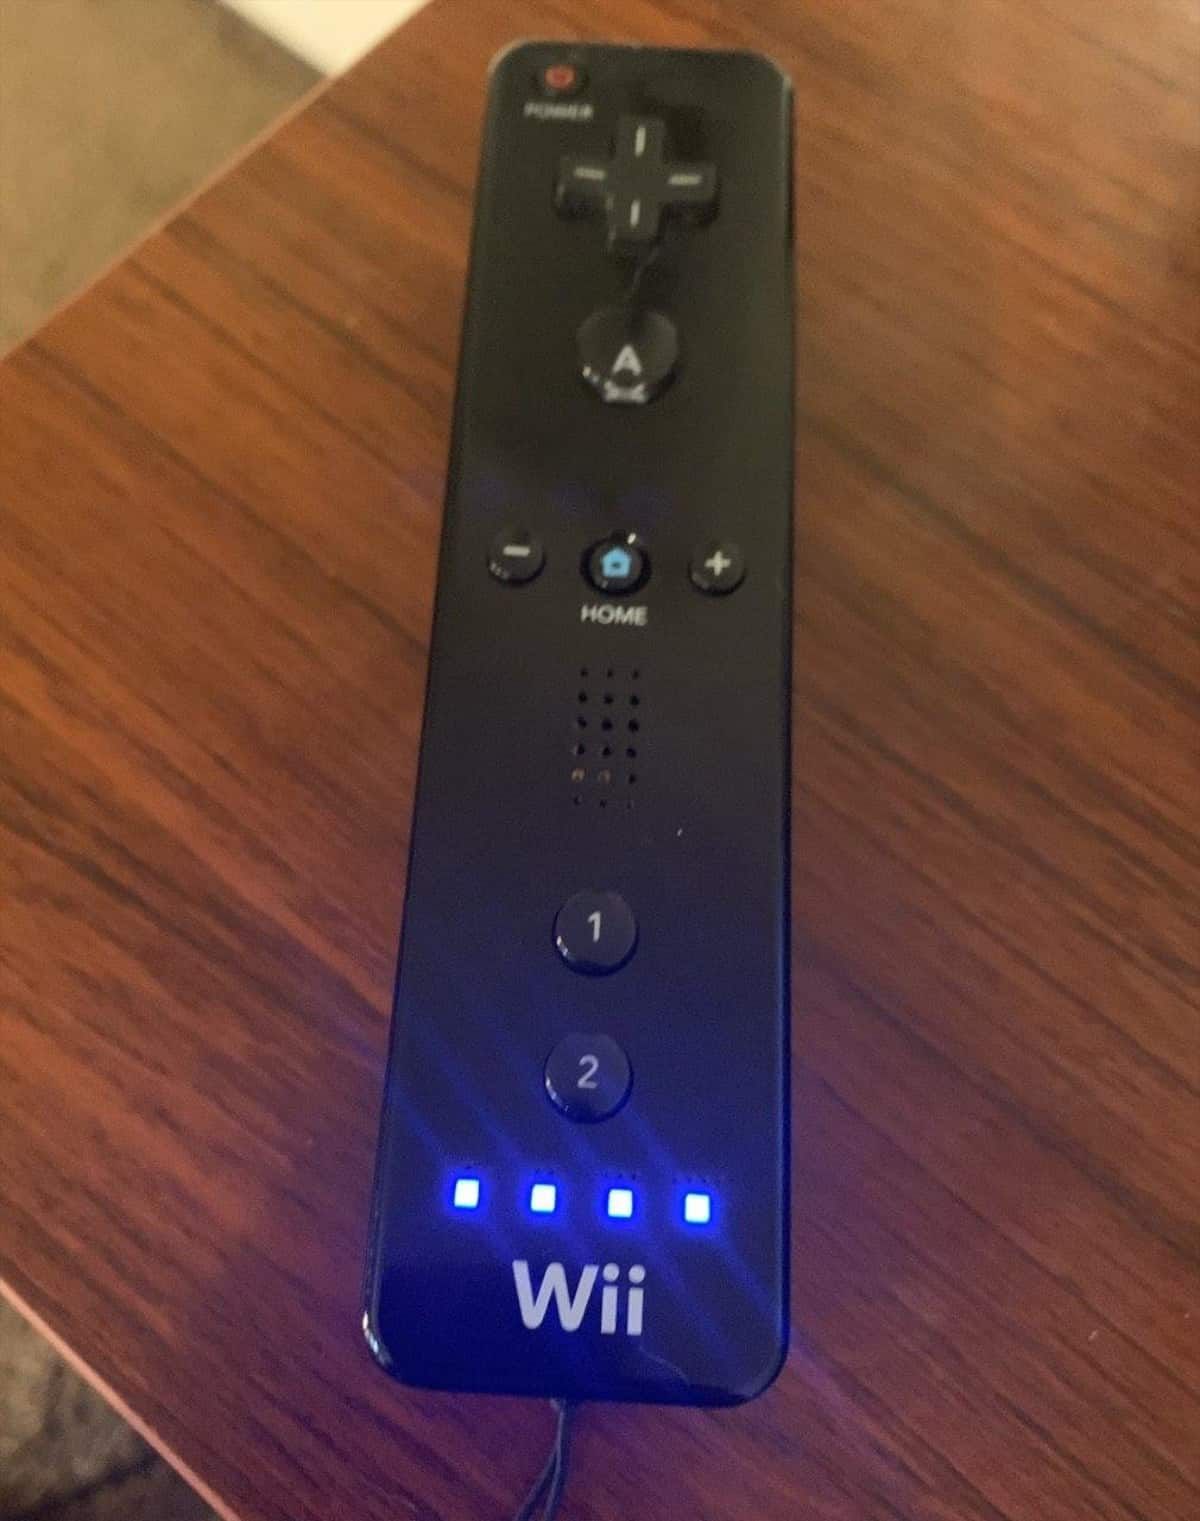 use wiimote for gamecube games dolphin mac